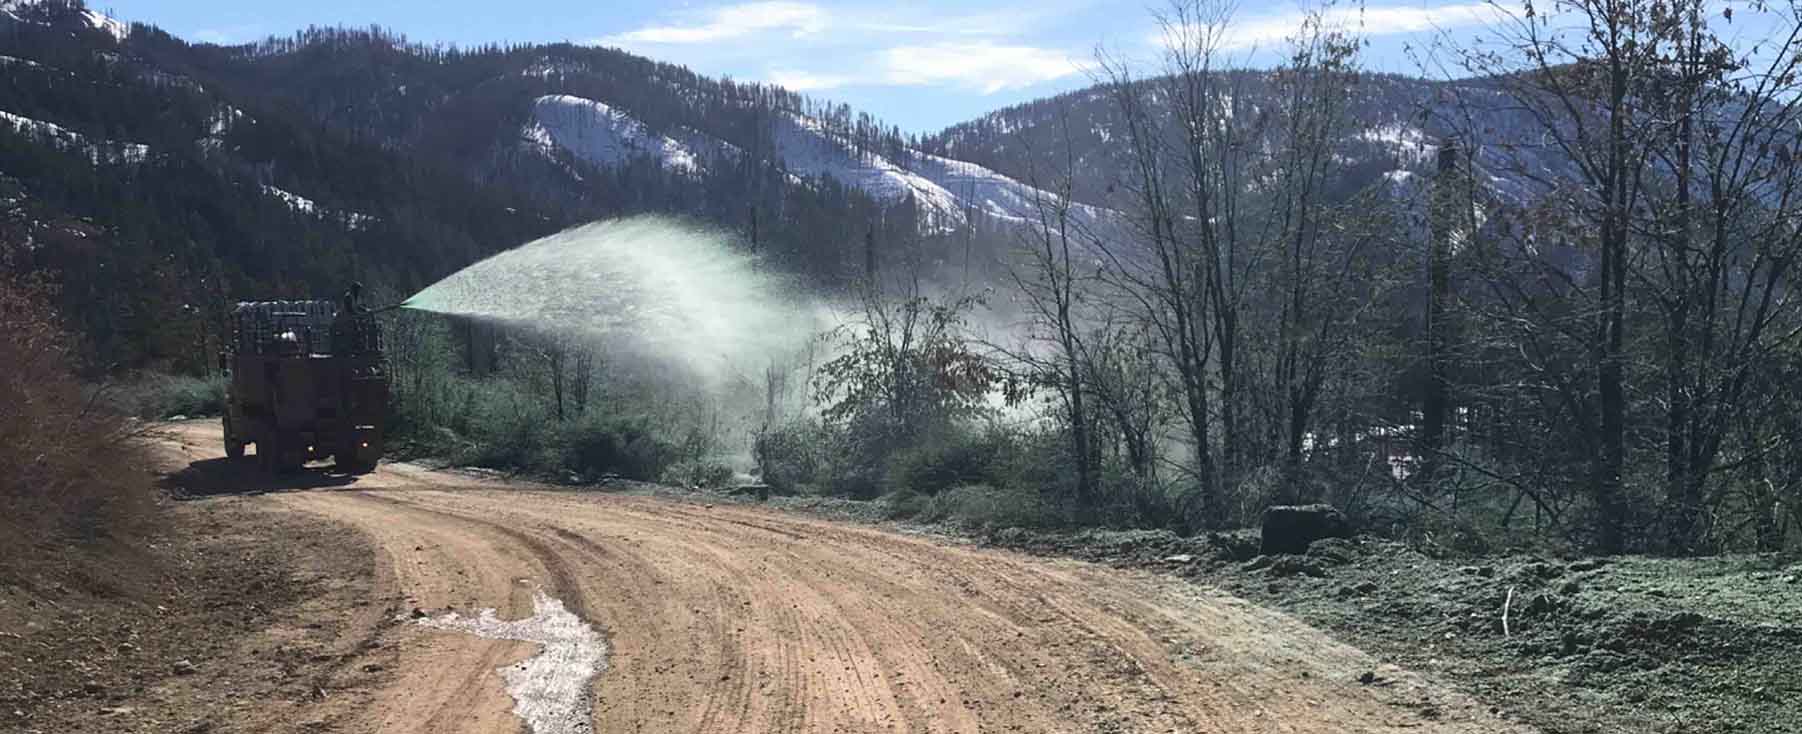 Truck applying erosion control material after Dixie Fire